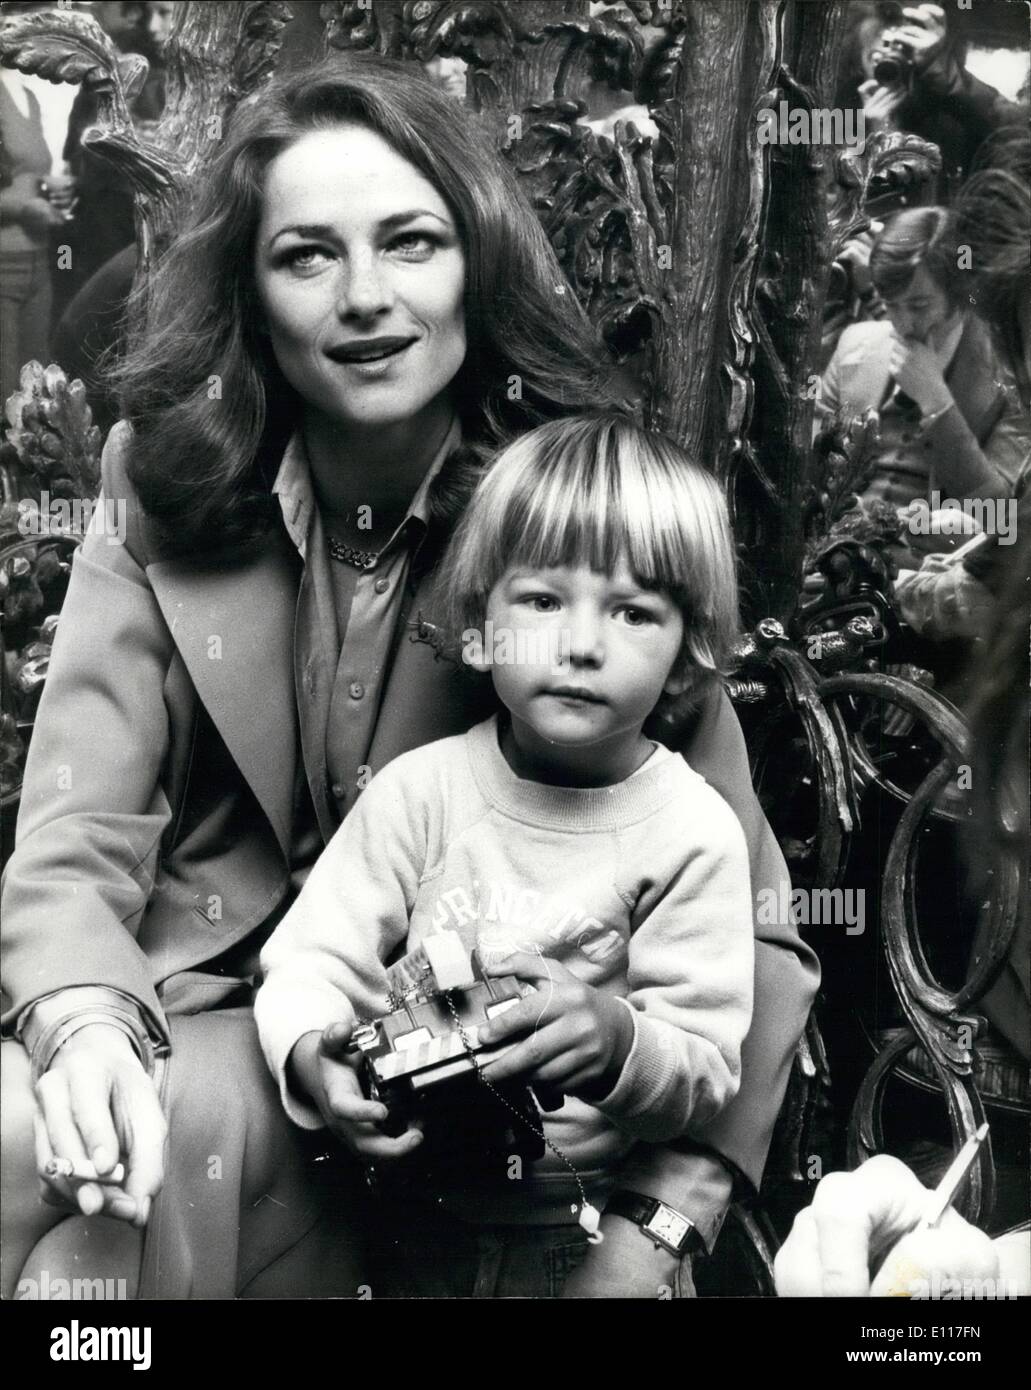 Mar. 03, 1976 - Charlotte Rampling is quitting films for a year to have a baby: Actress Charlotte Rampling returned to London yesterday - and immediately announced a year off from filming. 30-year-old Charlotte, whose latest picture ''Farewell My Lovely'' is another box office success, already has a 3-year-old son Barnany, but, says Charlotte ''I dont like the idea of an only child, I want a bigger family''. Her husband Bryan Southcombn, who is also her business adviser, agrees. Photo shows actress Charlotte Rampling and her 3-year-old son, Barnaby, pictured at the Dorchester Hotel in London. Stock Photo